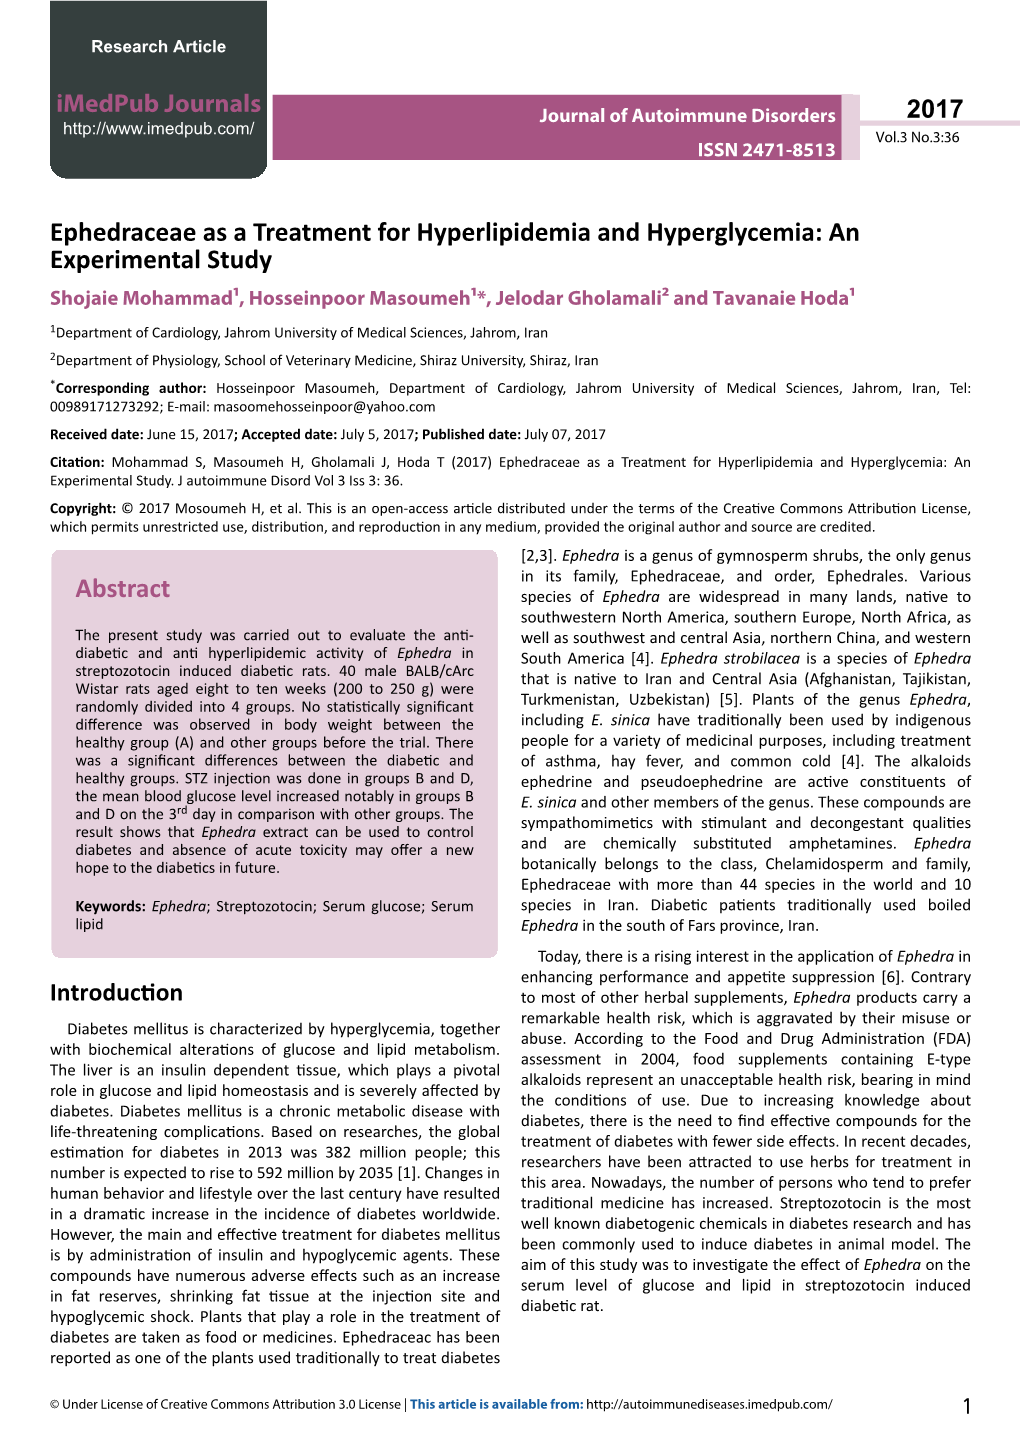 Ephedraceae As a Treatment for Hyperlipidemia and Hyperglycemia